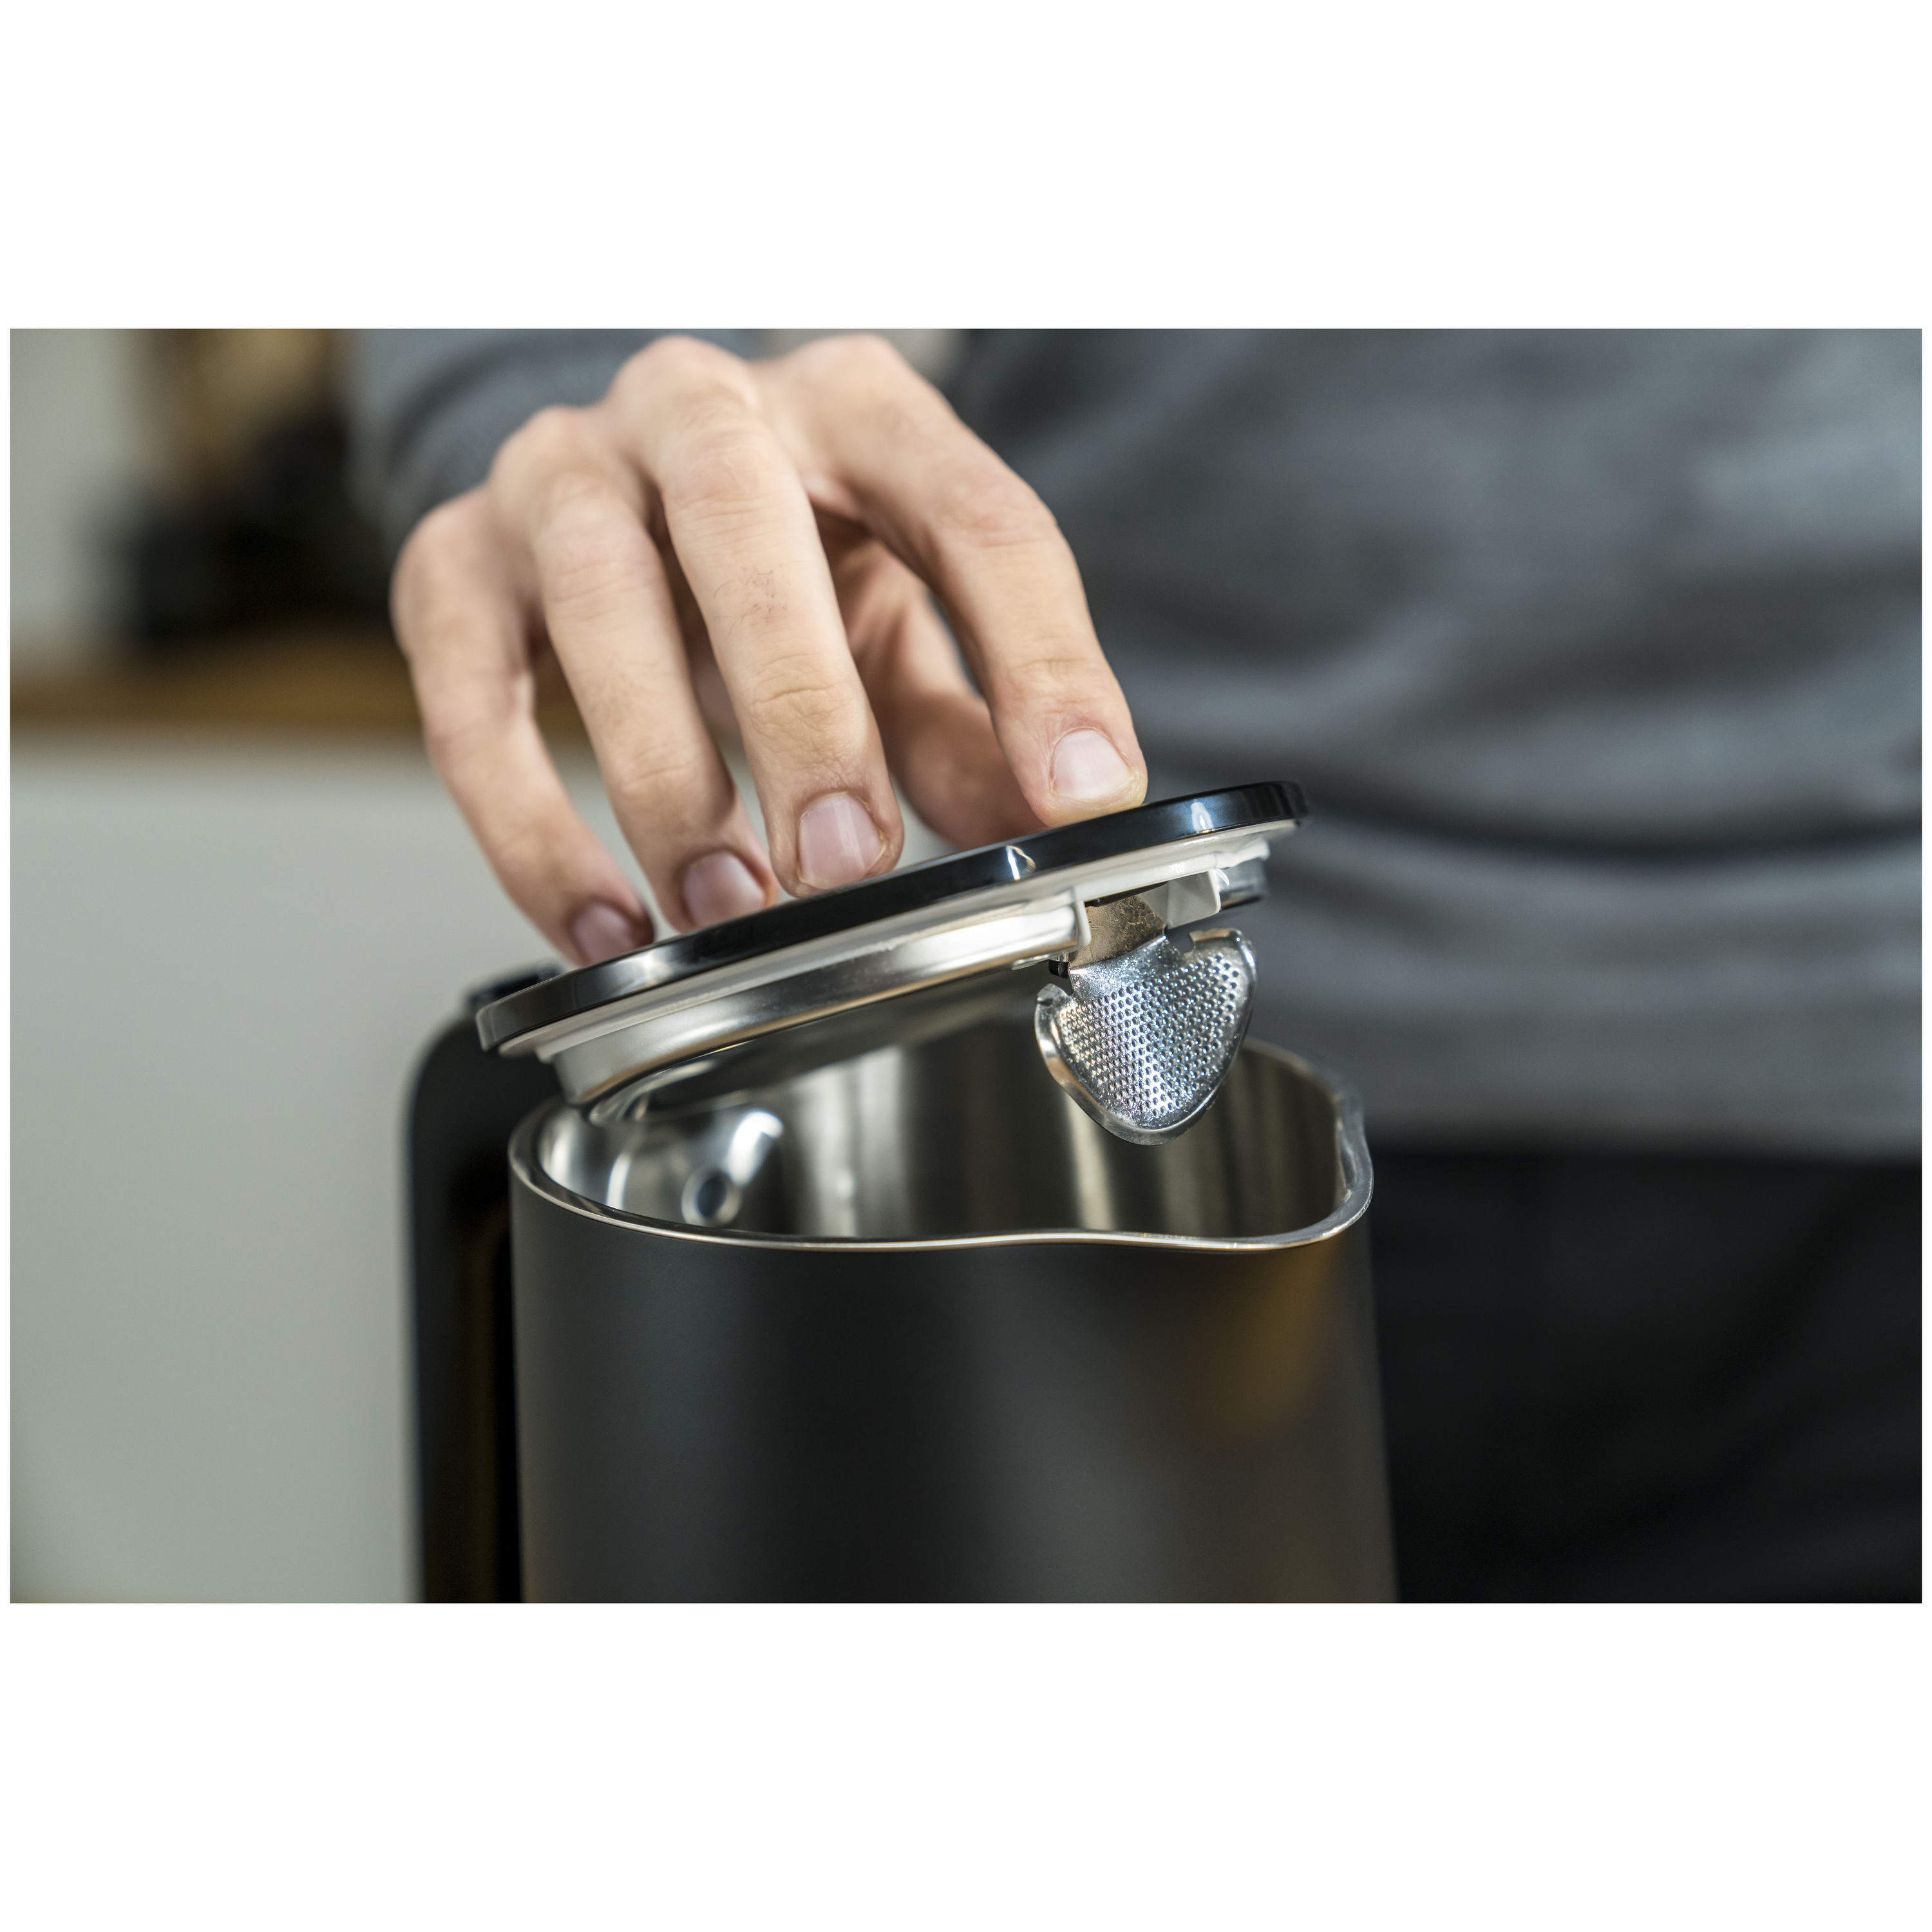 ZWILLING 1L Kettle in Silver, Enfinigy Series in 2023